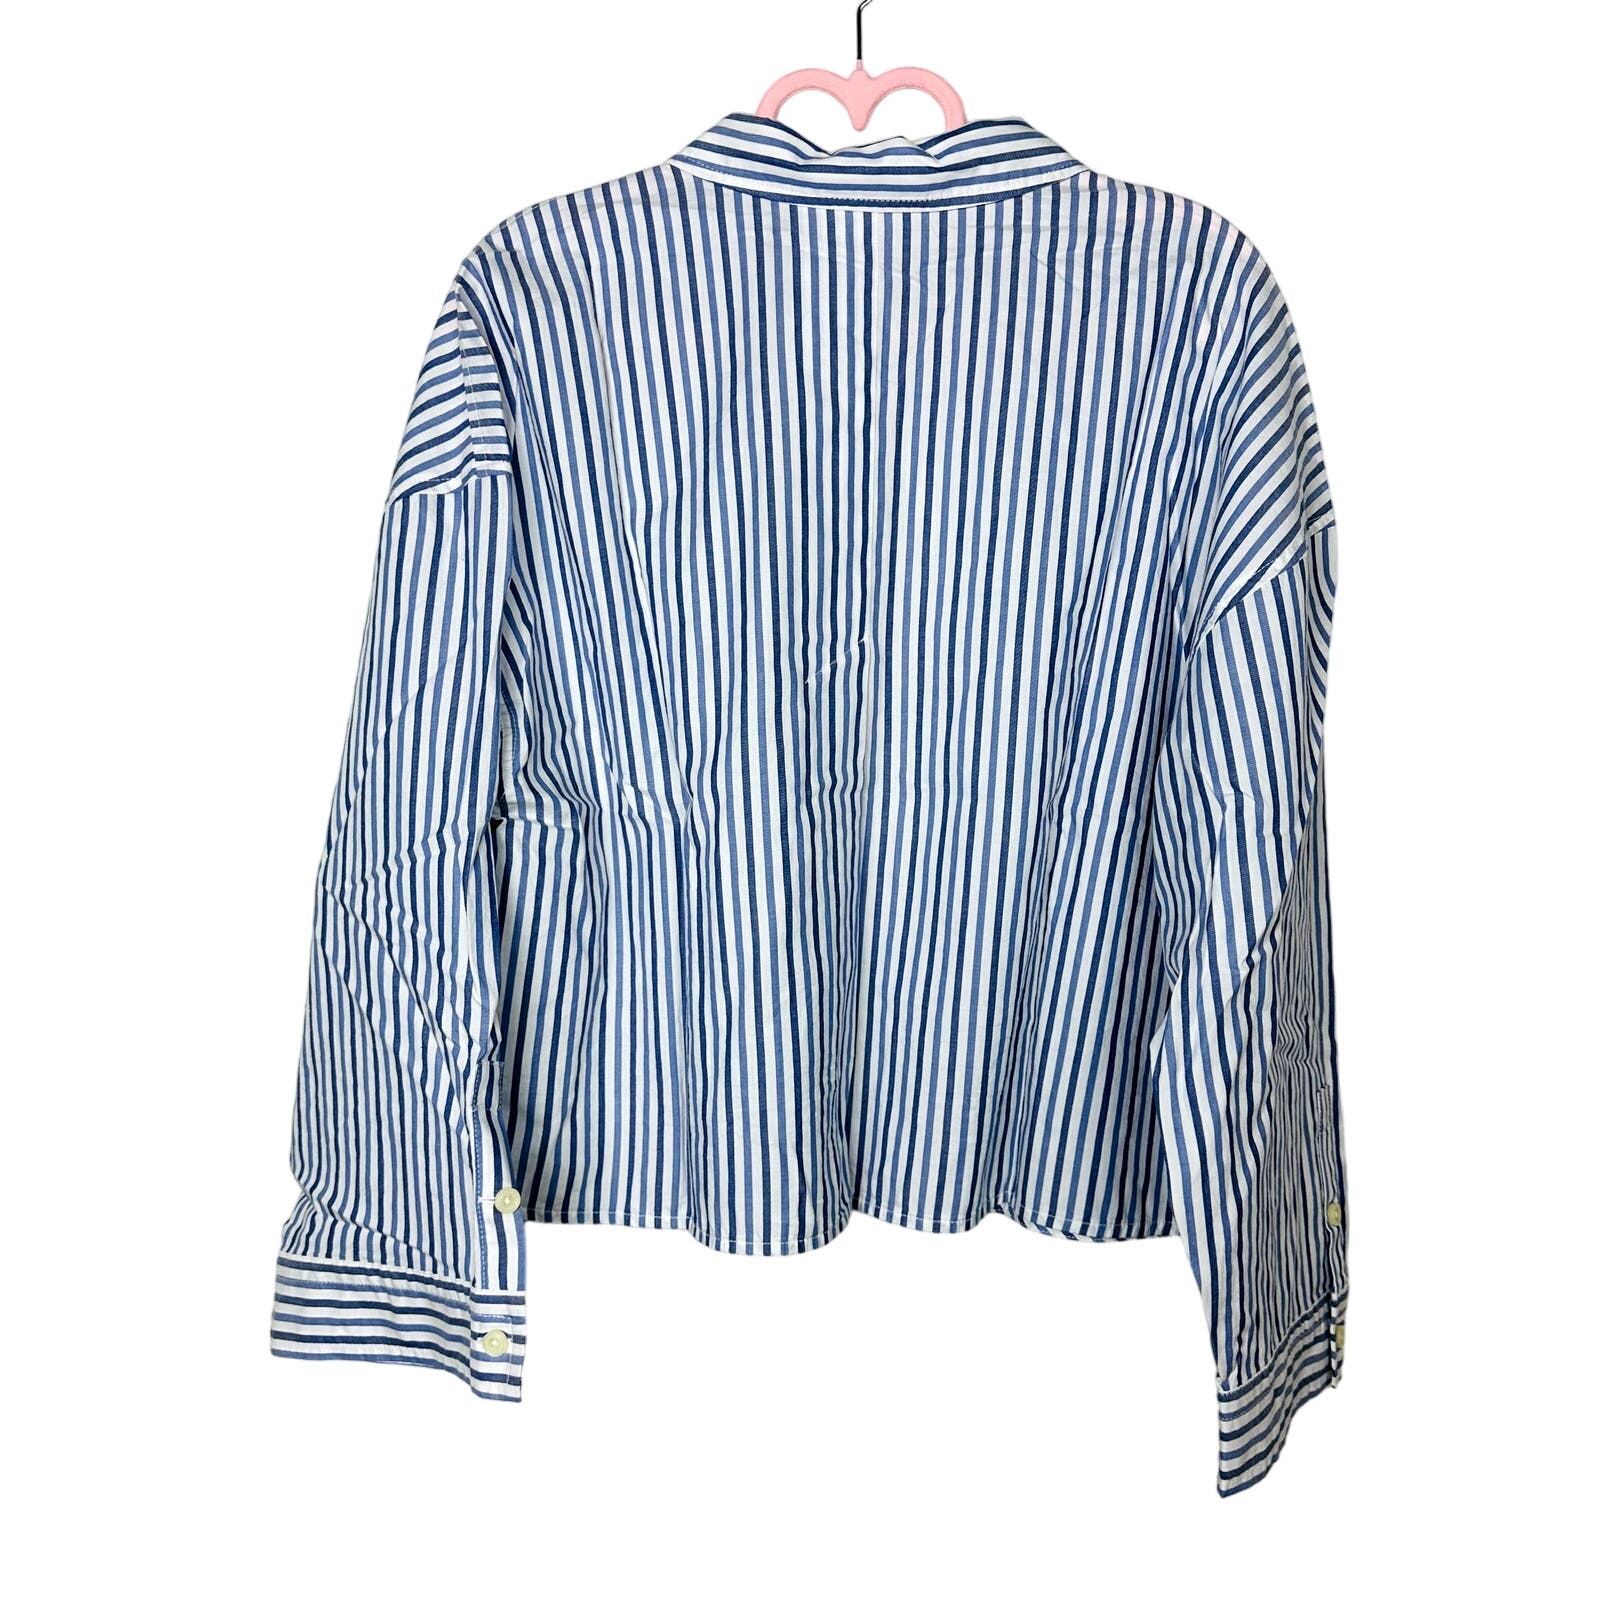 Everlane NWT The Woven P.J. Longsleeve Button Front Striped Top Blue White Size Small